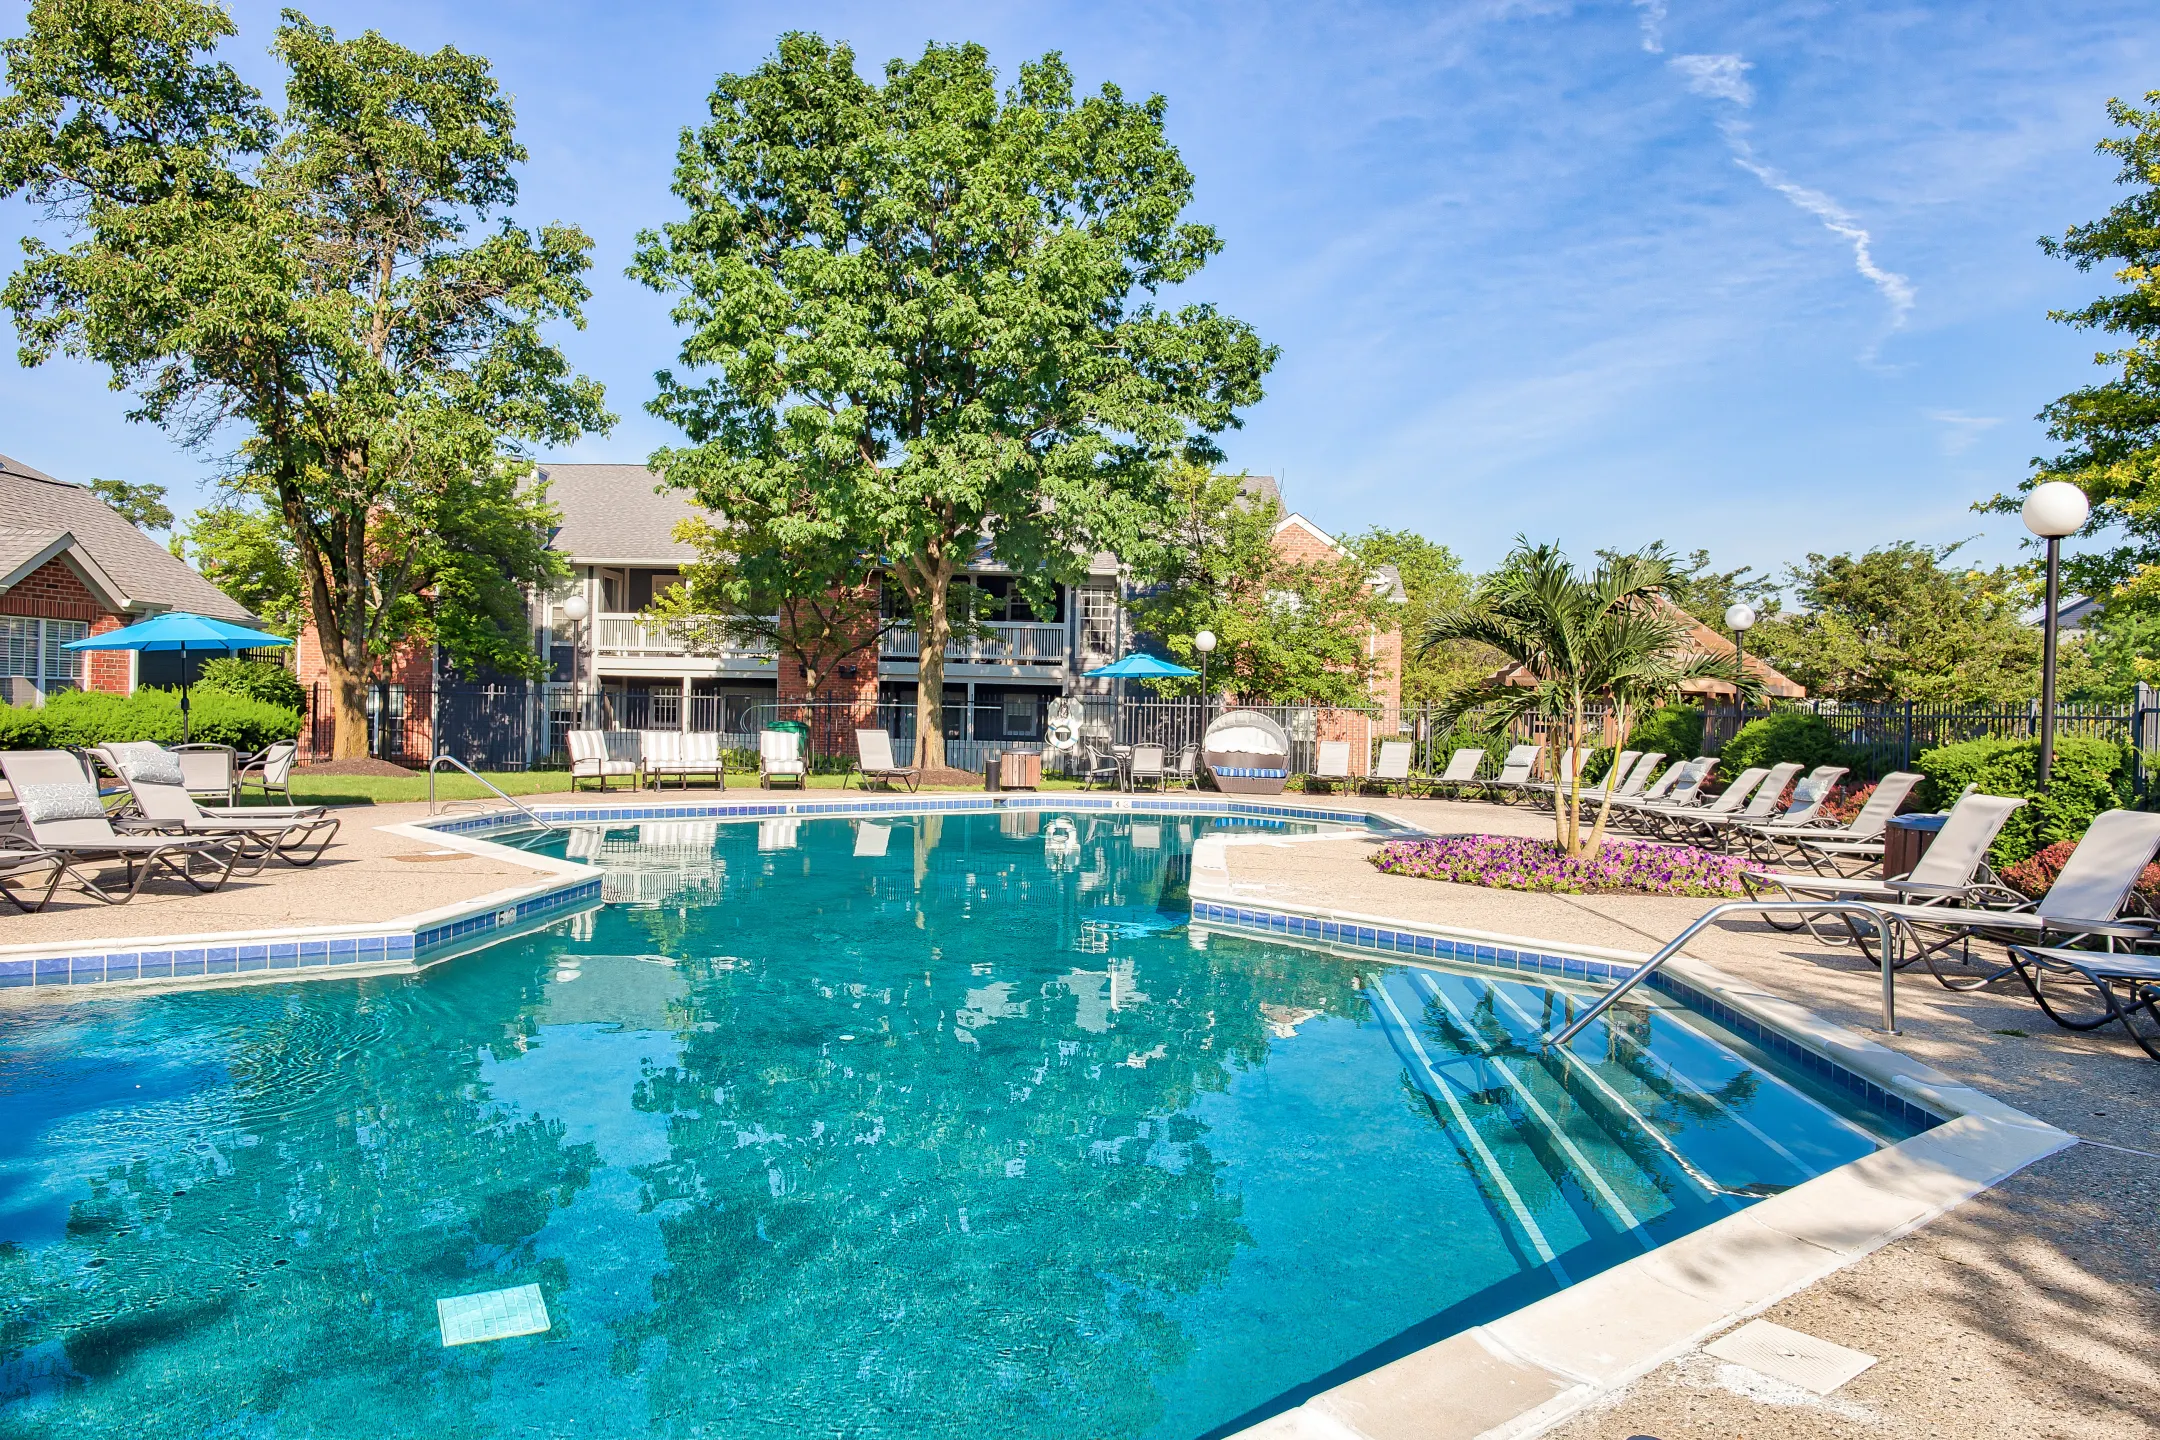 Pool - Lakeshore - Indianapolis, IN